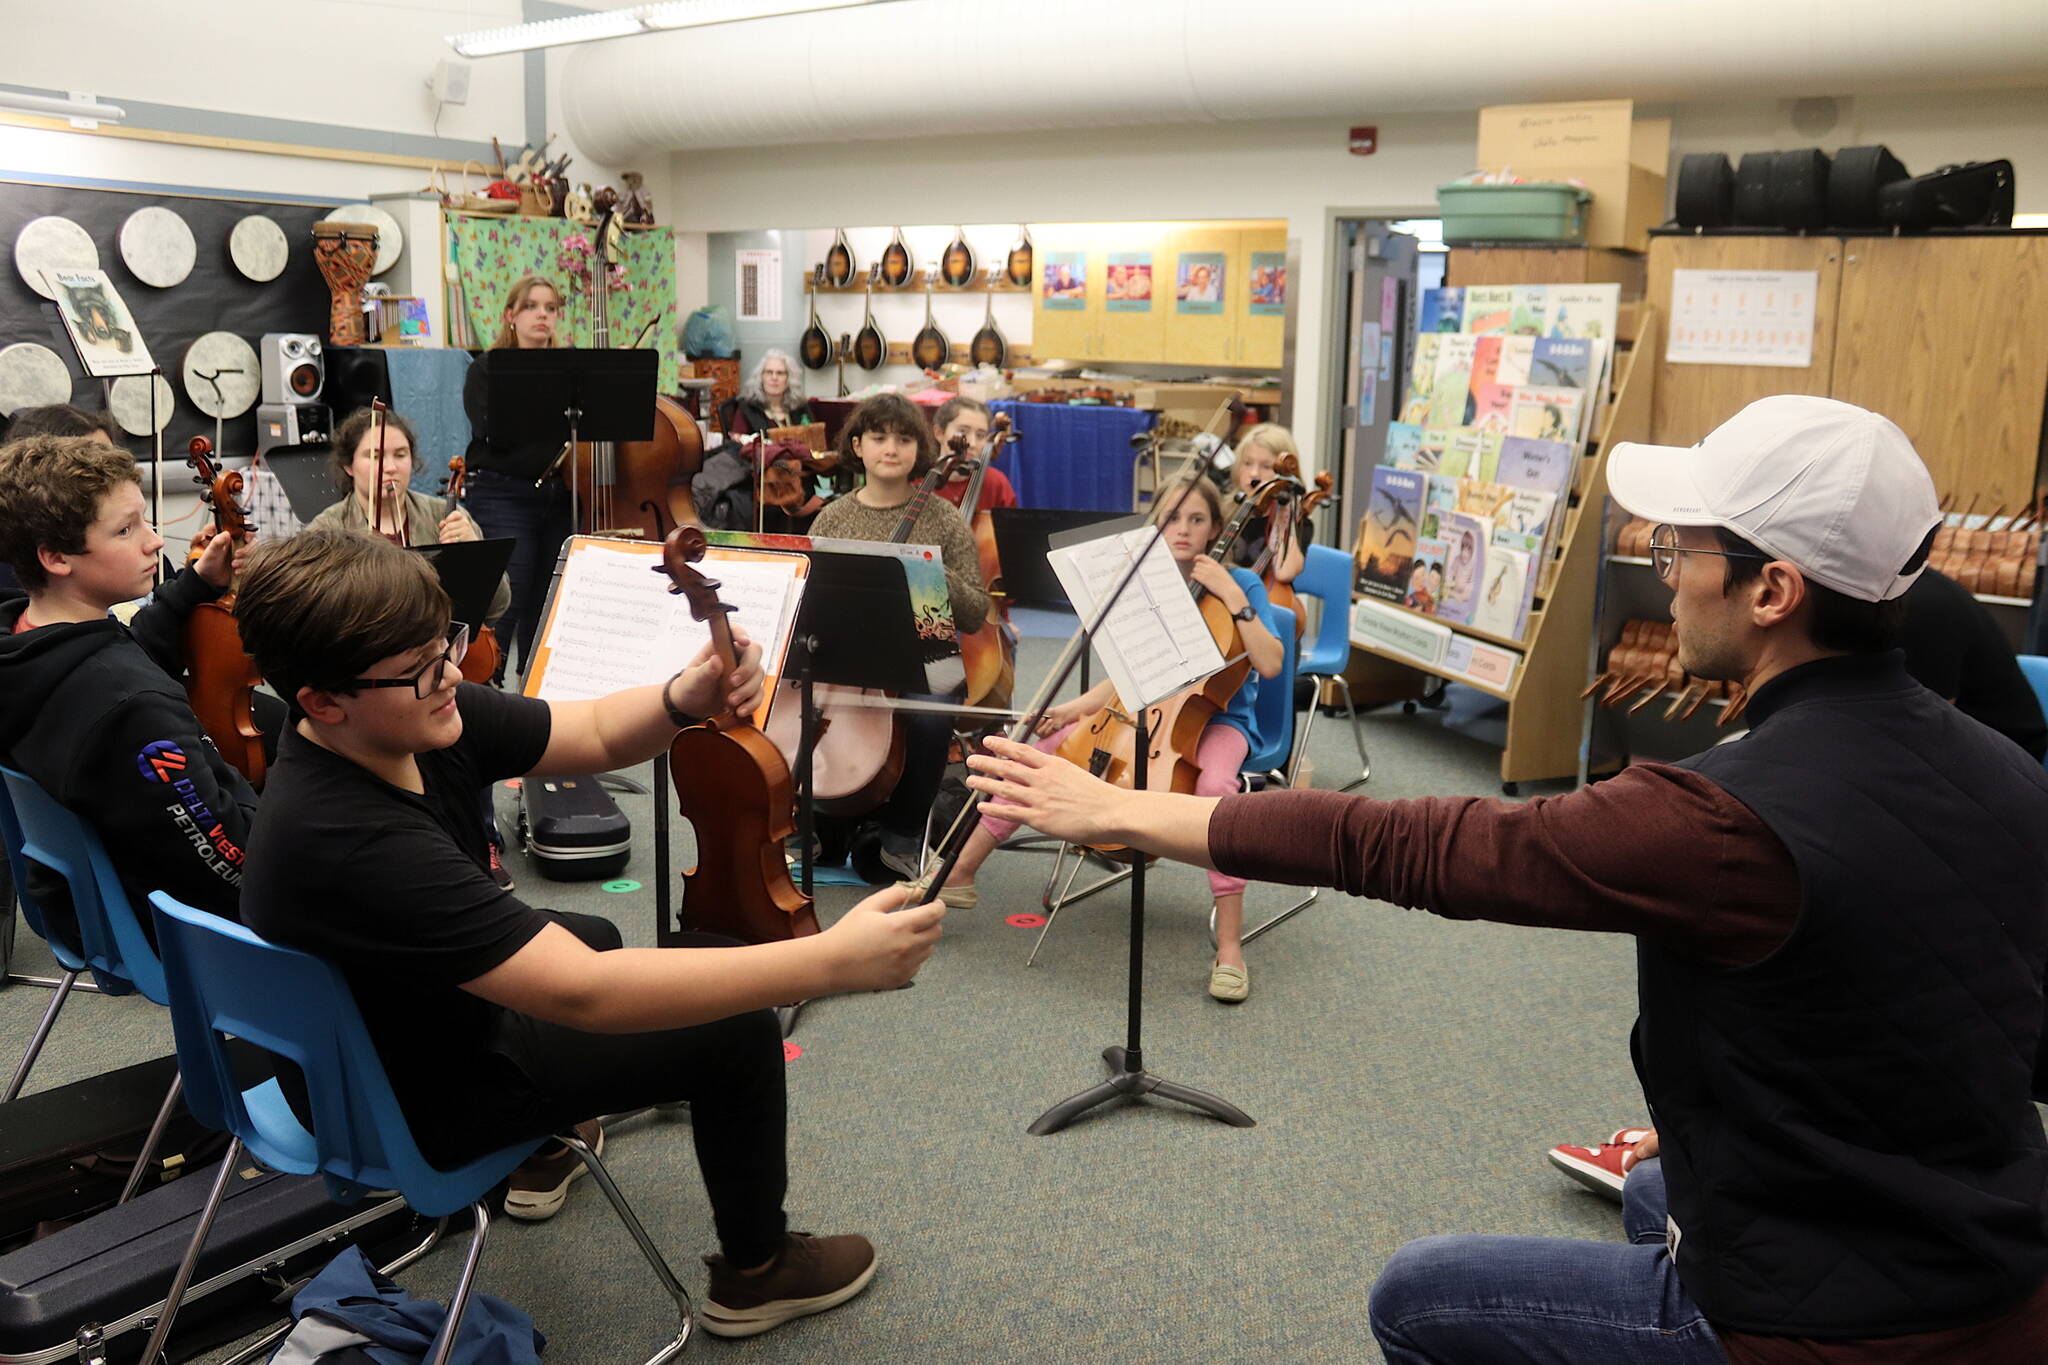 Zack Clark, right, of the visiting Simply Three string trio borrows a violin from Arlo Carlton, 12, to demonstrate a technique during a workshop Friday evening at Sitʼ Eeti Shaanáx̱ Glacier Valley Elementary School for a dozen students in grades 6-12 who are alumni of the Juneau Alaska Music Matters (JAMM) program. The students performed a 30-minute concert Saturday night at Juneau-Douglas High School: Yadaa.at Kalé before Simply Three took the stage to perform the finale of the fall Juneau Jazz & Classics festival. (Mark Sabbatini / Juneau Empire)